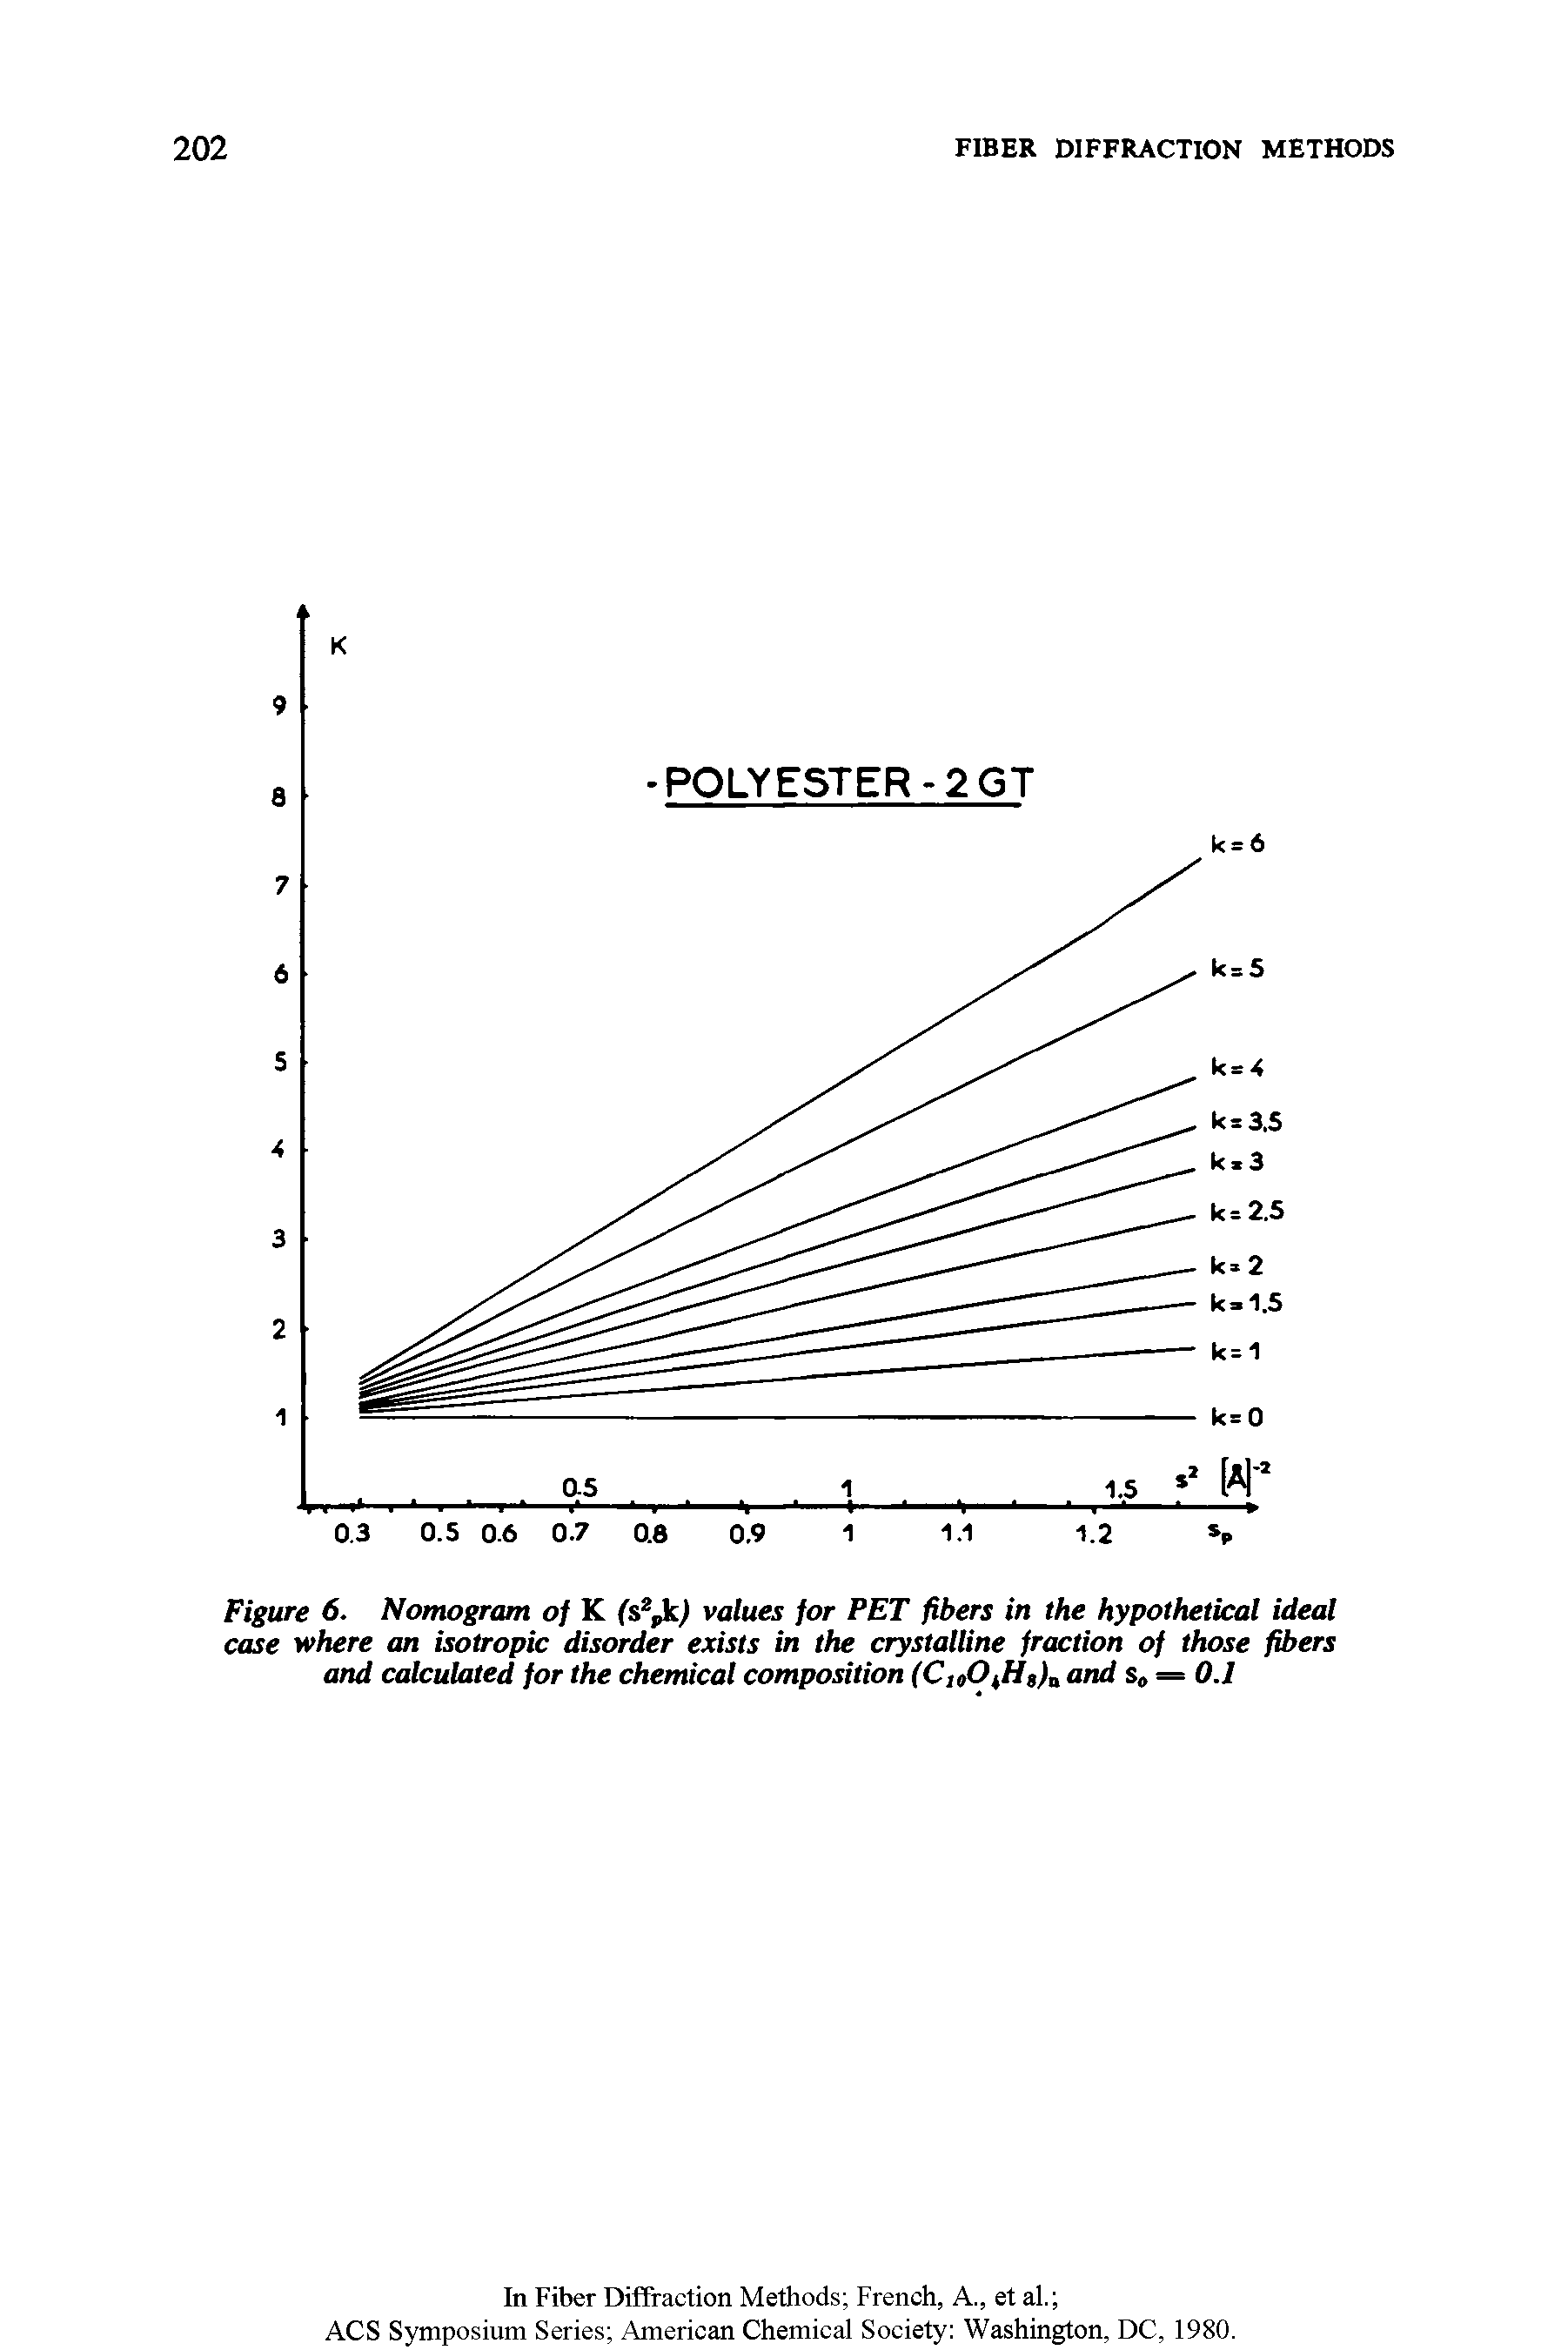 Figure 6. Nomogram of K (s2pk,) values for PET fibers in the hypothetical ideal case where an isotropic disorder exists in the crystalline fraction of those fibers and calculated for the chemical composition (C,<,OtHs)a and s = 0.1...